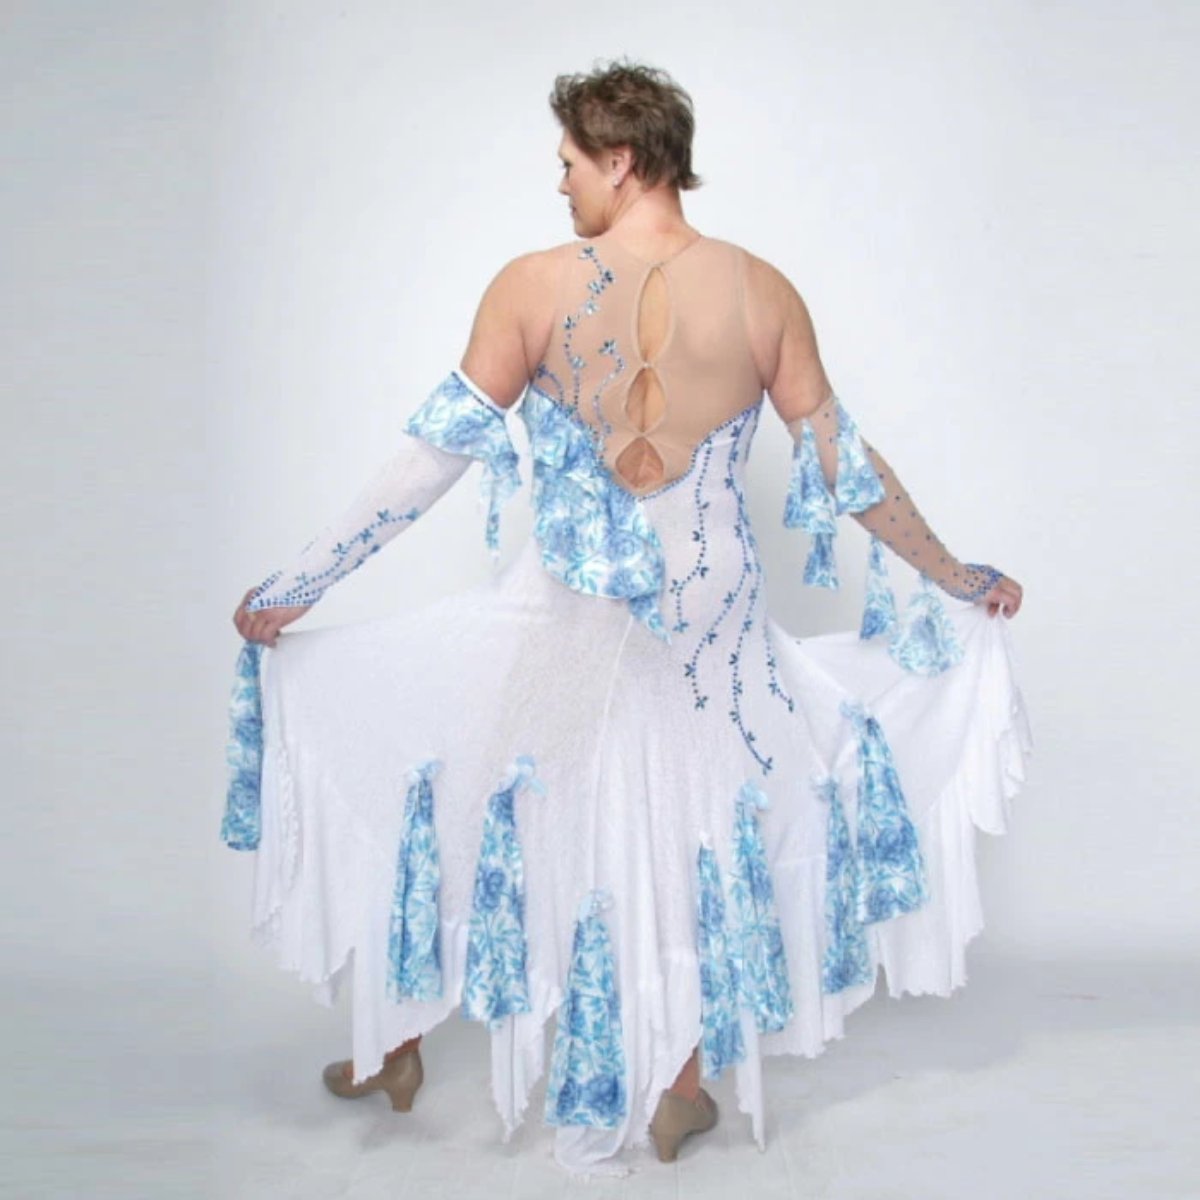 back view of White ballroom dress with blue accents was created on nude illusion of a soft white knit with flounce accents of sky blue & white floral print satin, embellished with sapphire Swarovski stonework & miniature white silk roses. 